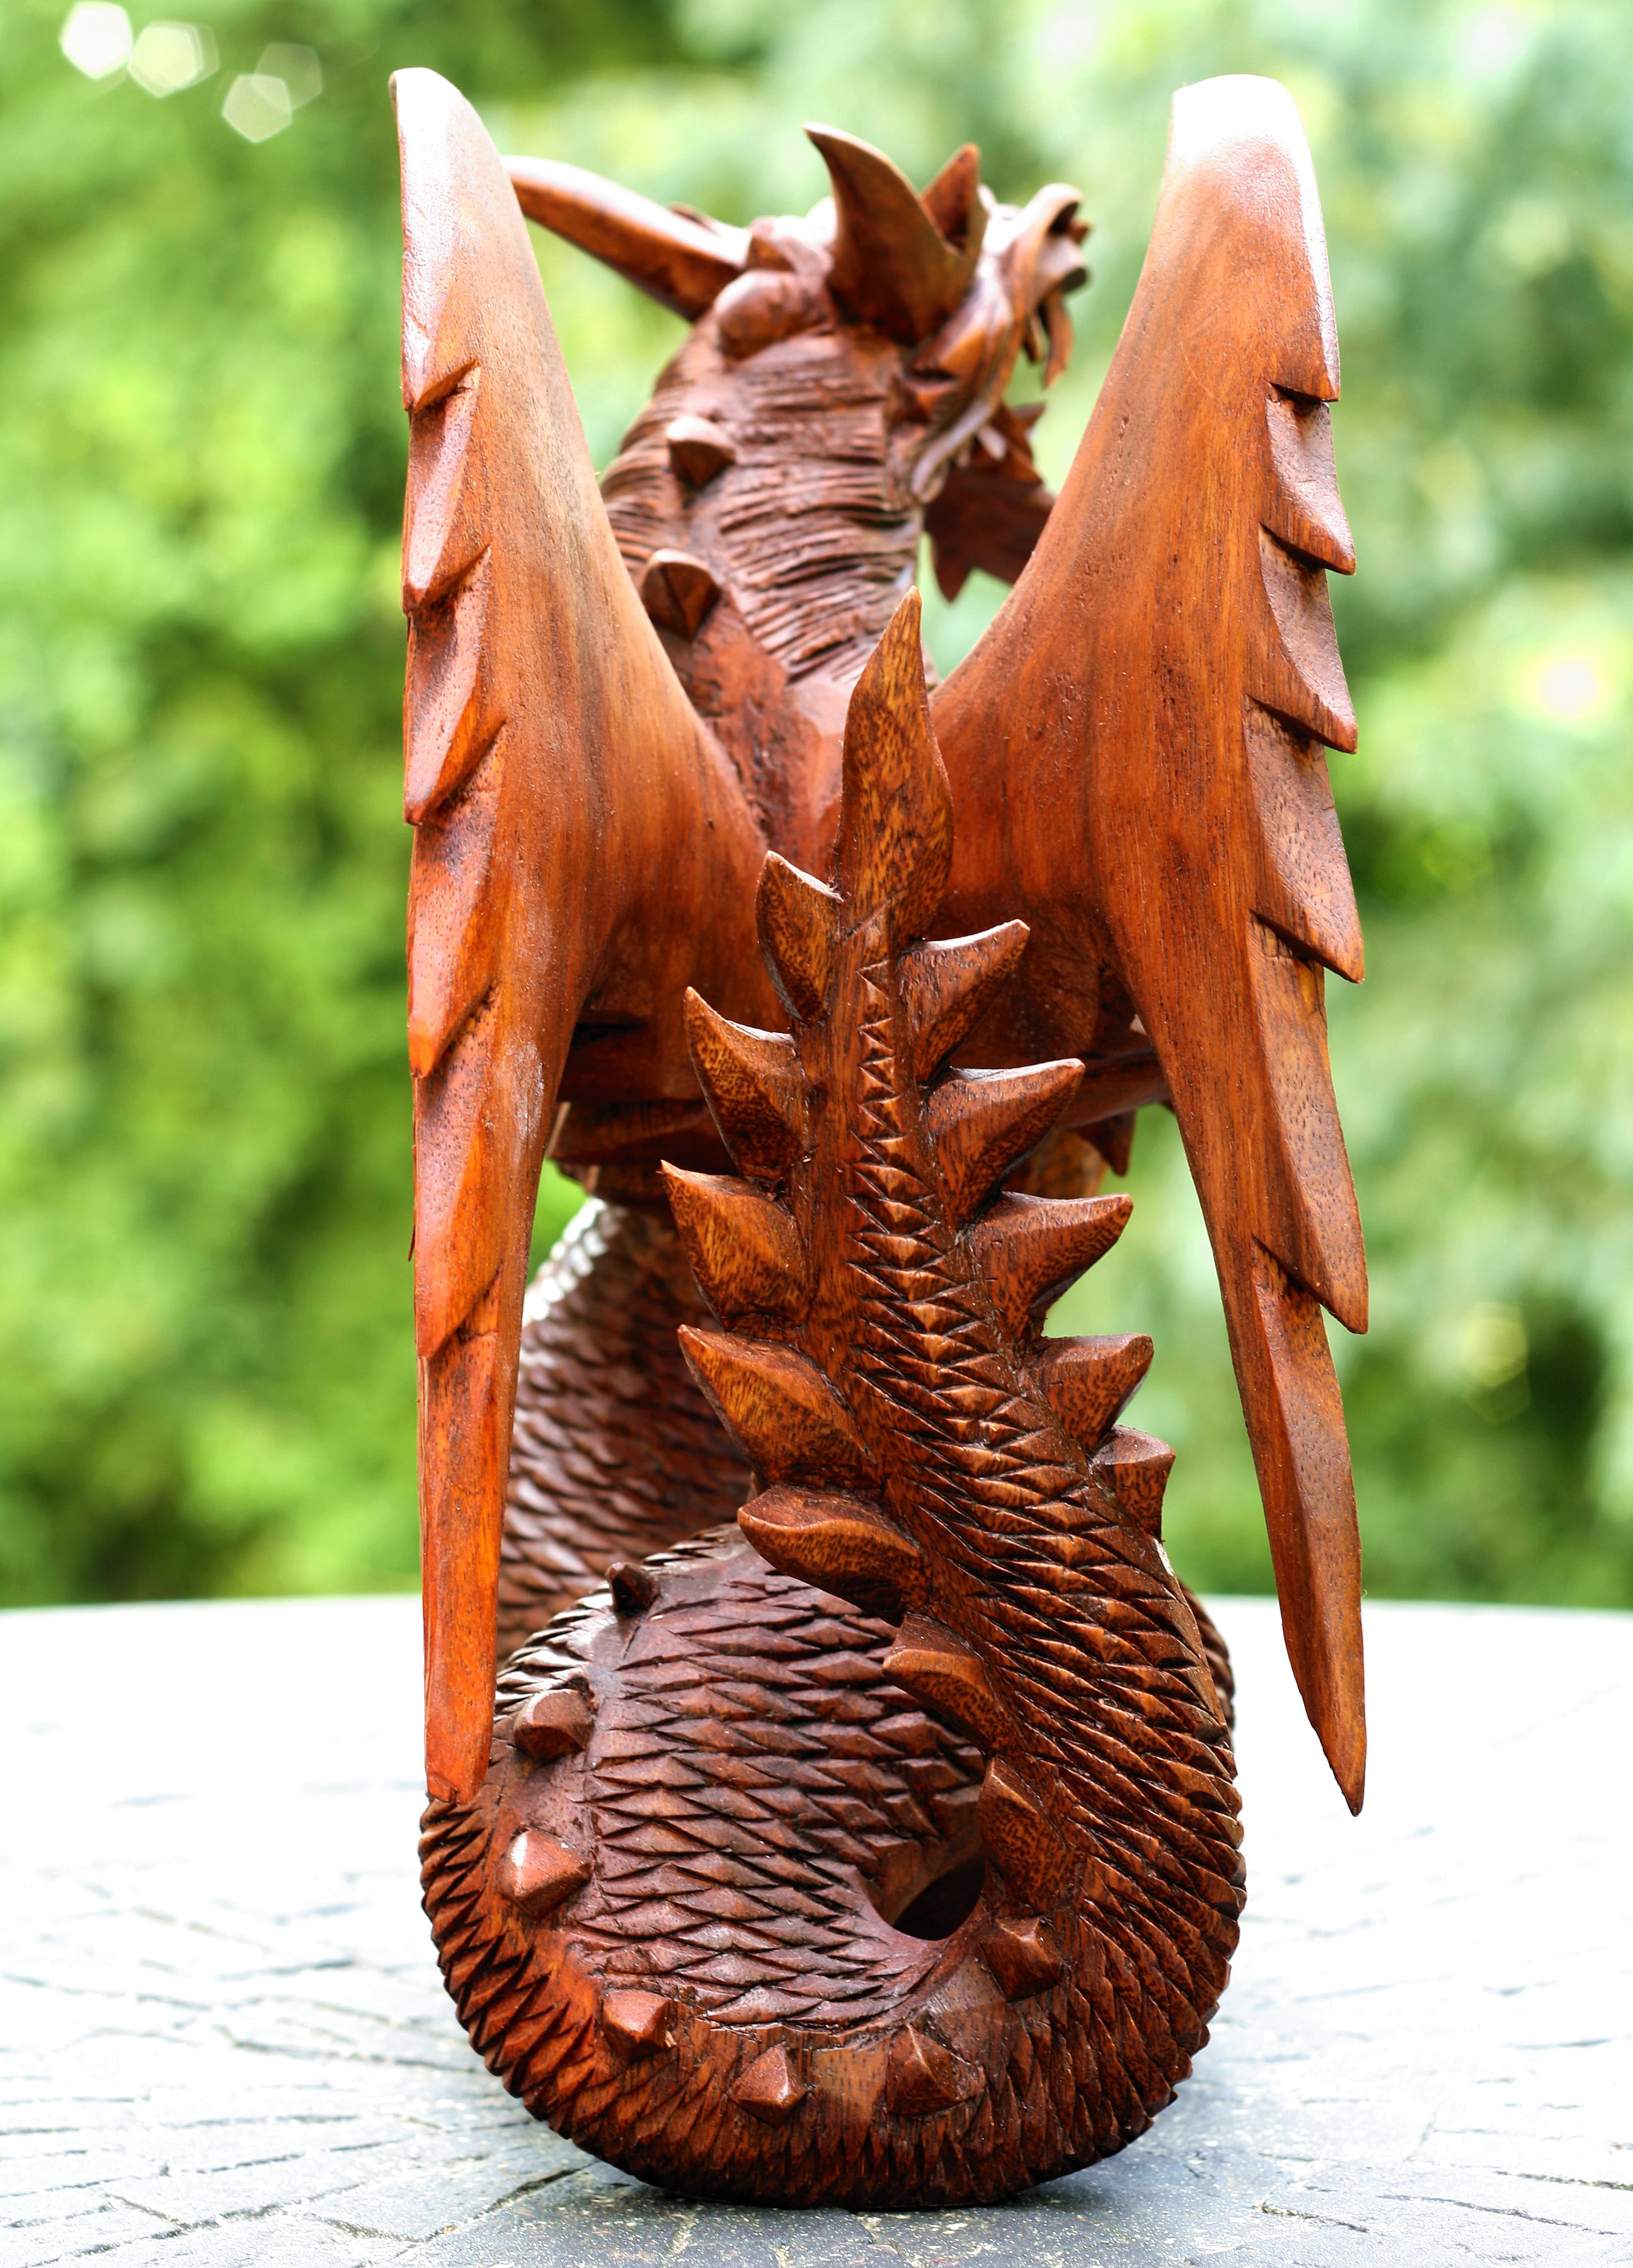 G6 Collection Wooden Crawling Dragon Handmade Sculpture Statue Handcrafted  Gift Art Decorative Home Decor Figurine Accent Decoration Artwork Hand